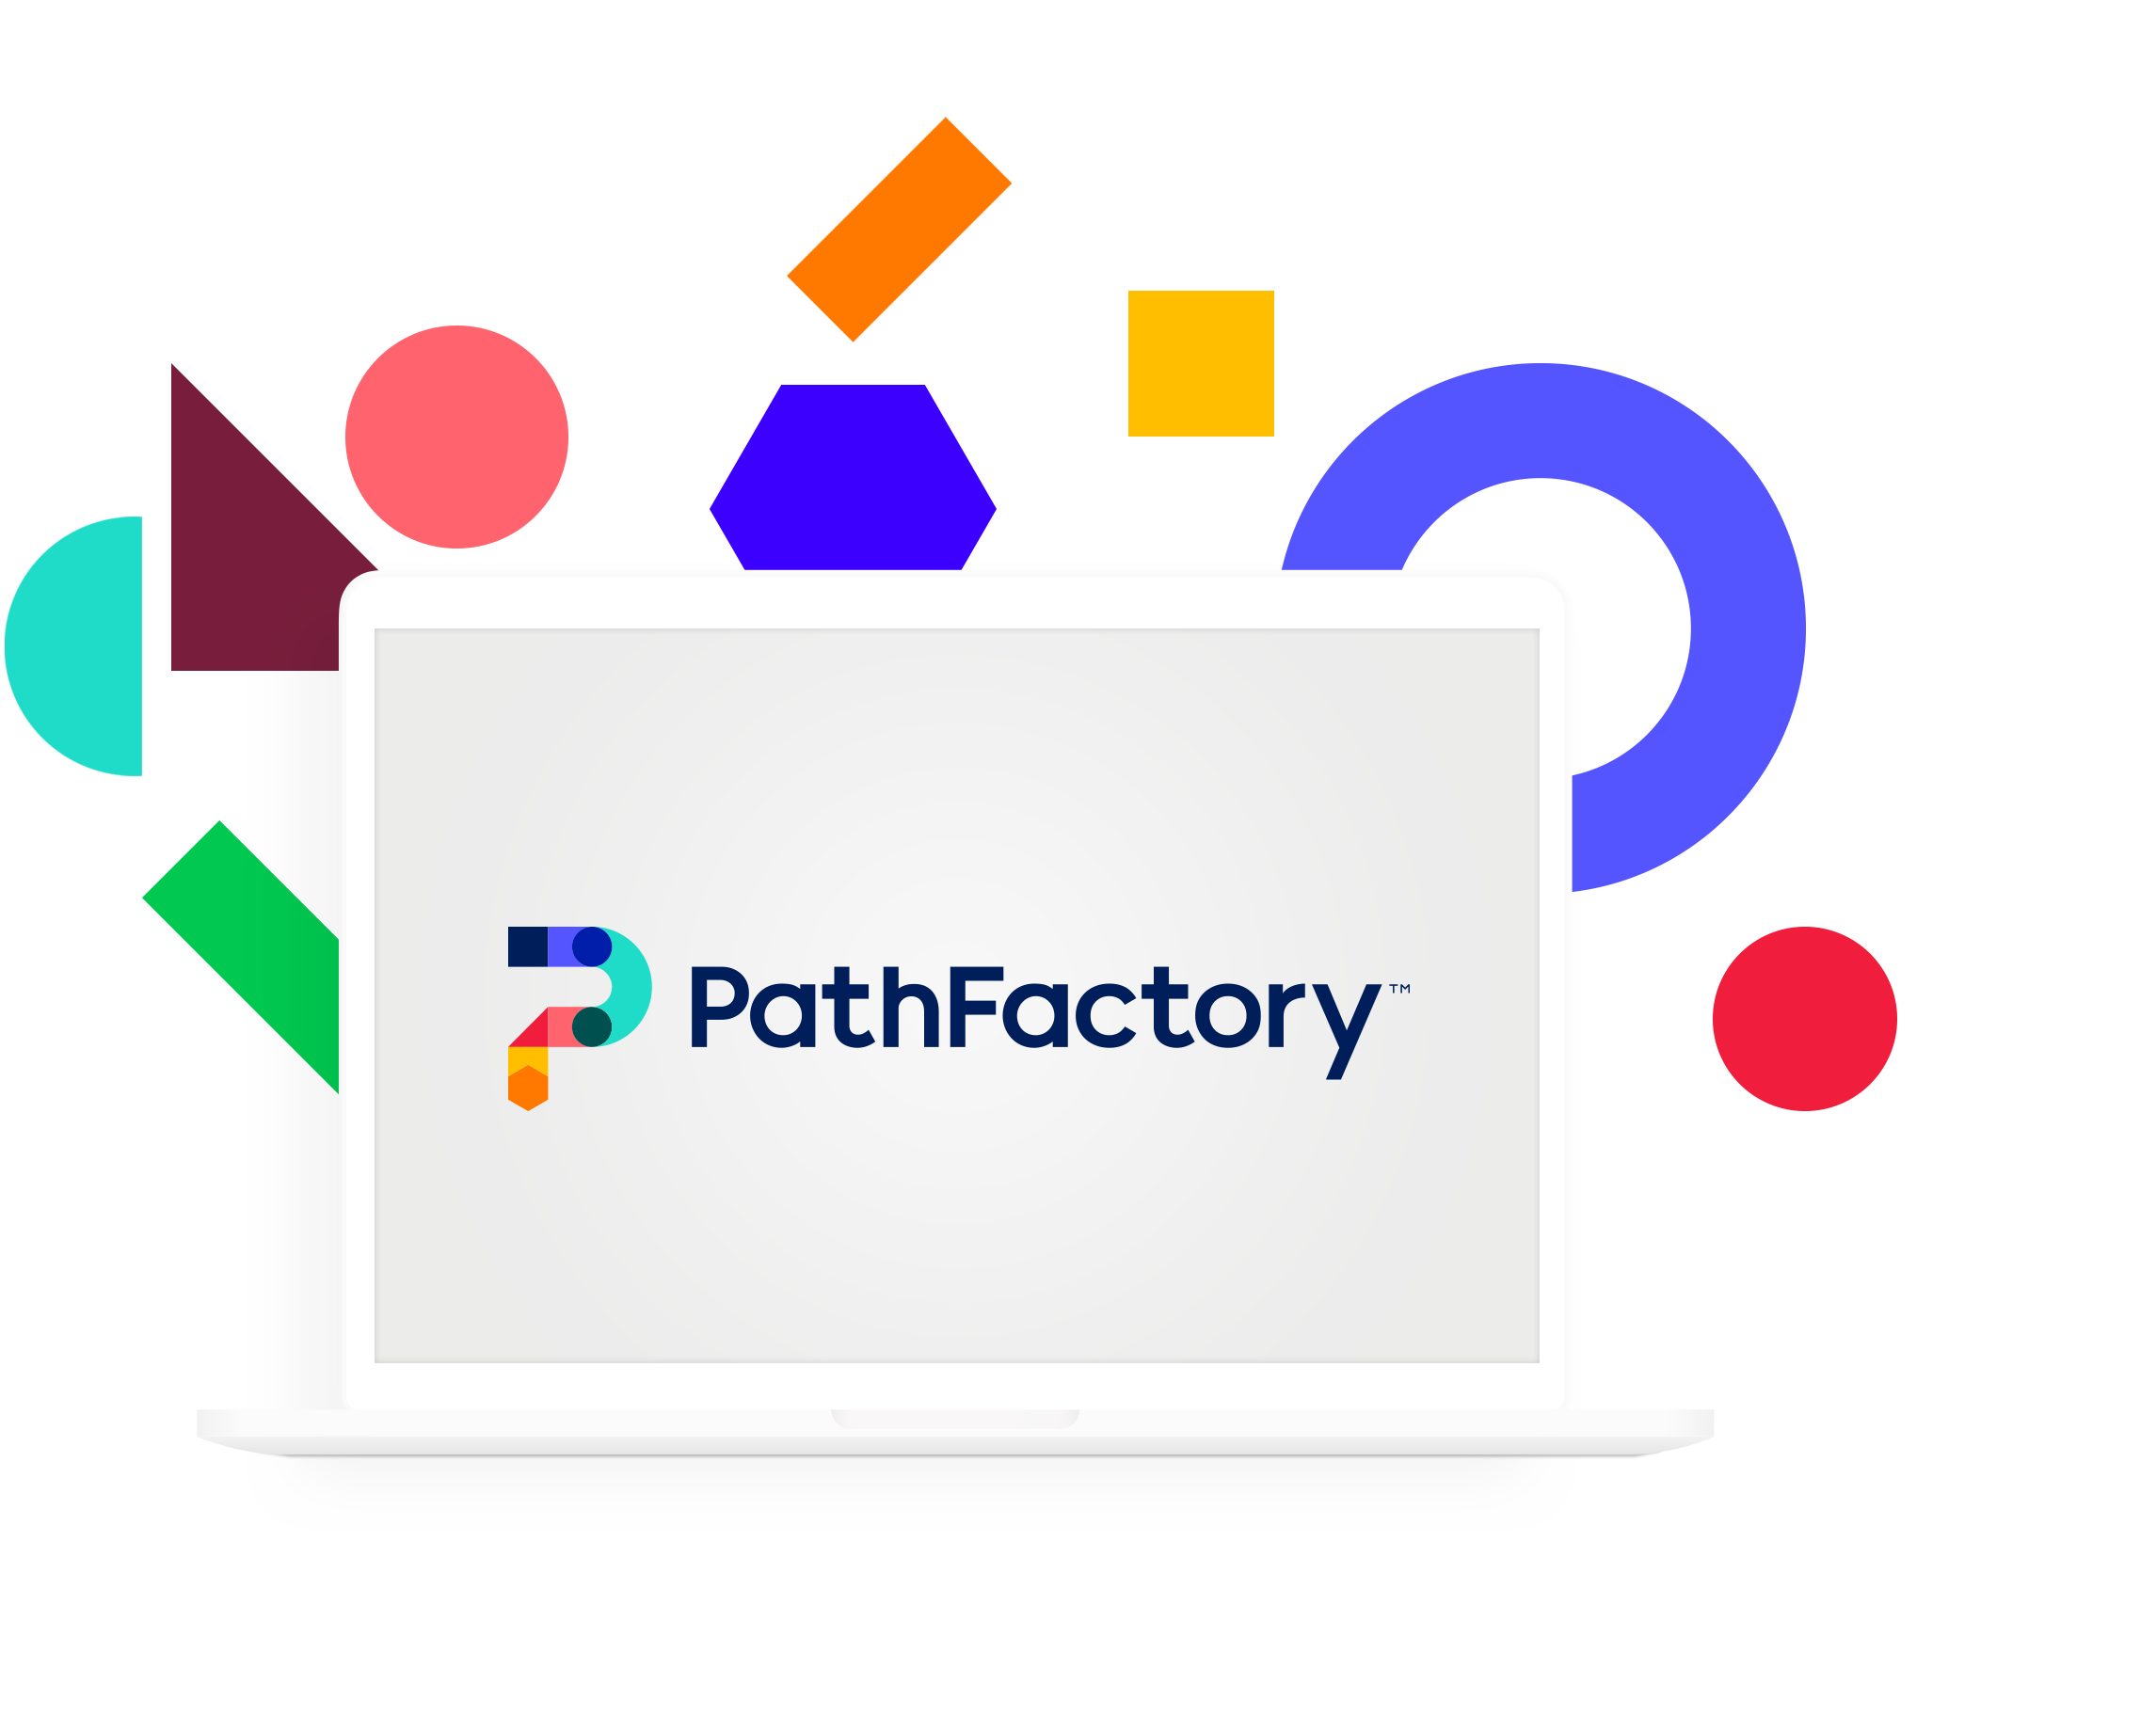 An illustrated computer with the PathFactory logo and various coloured, decorative shapes behind the computer.